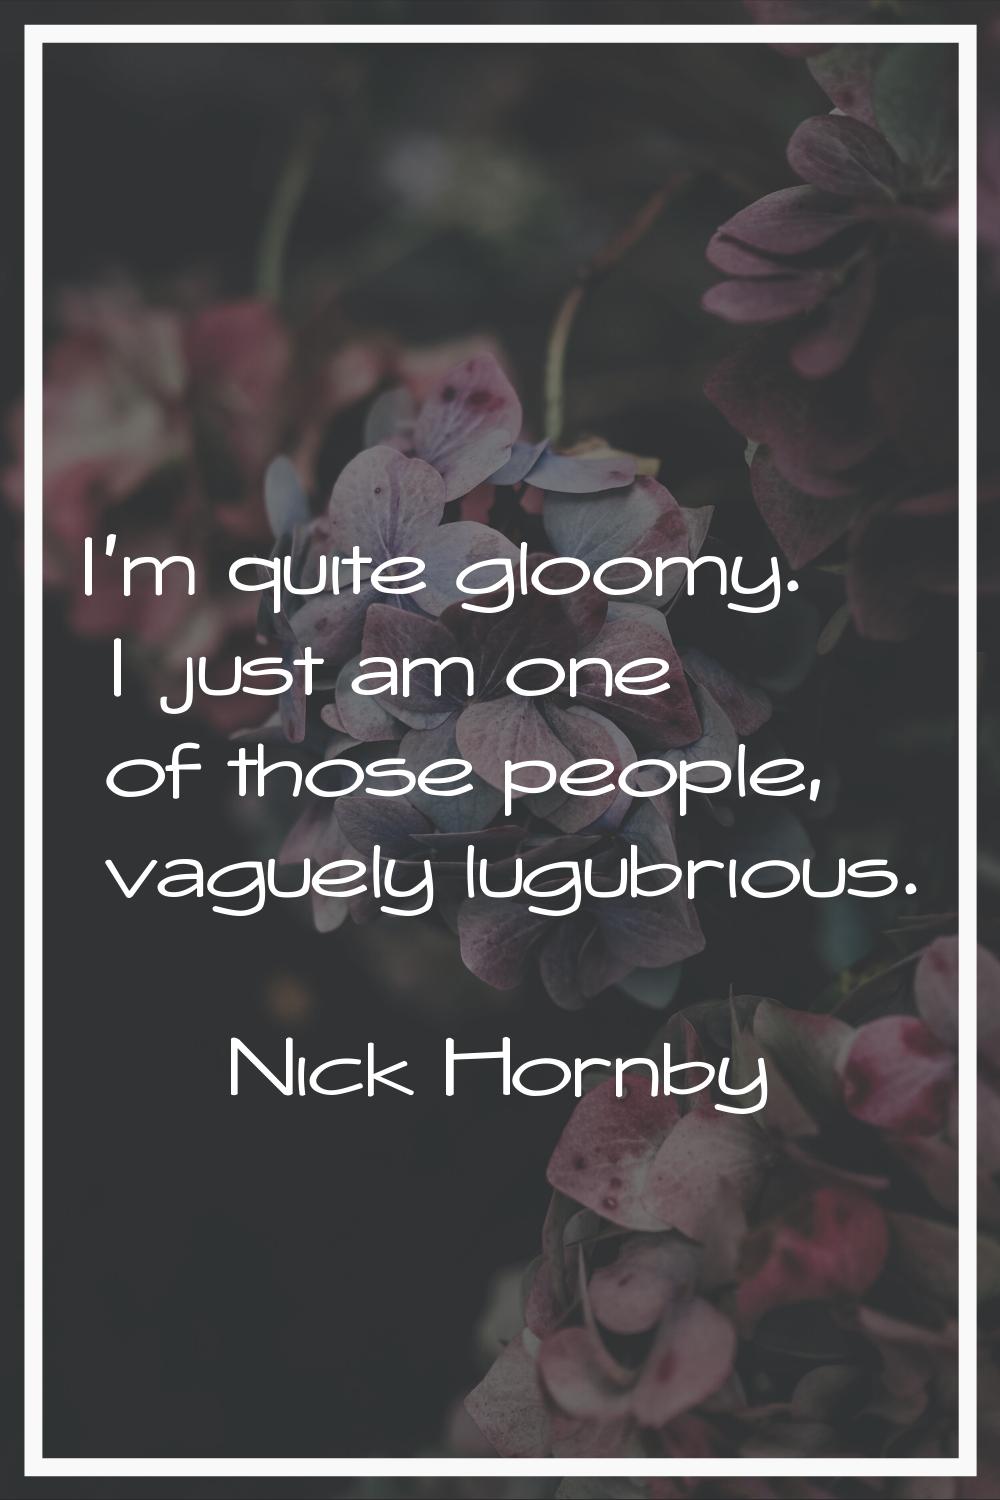 I'm quite gloomy. I just am one of those people, vaguely lugubrious.